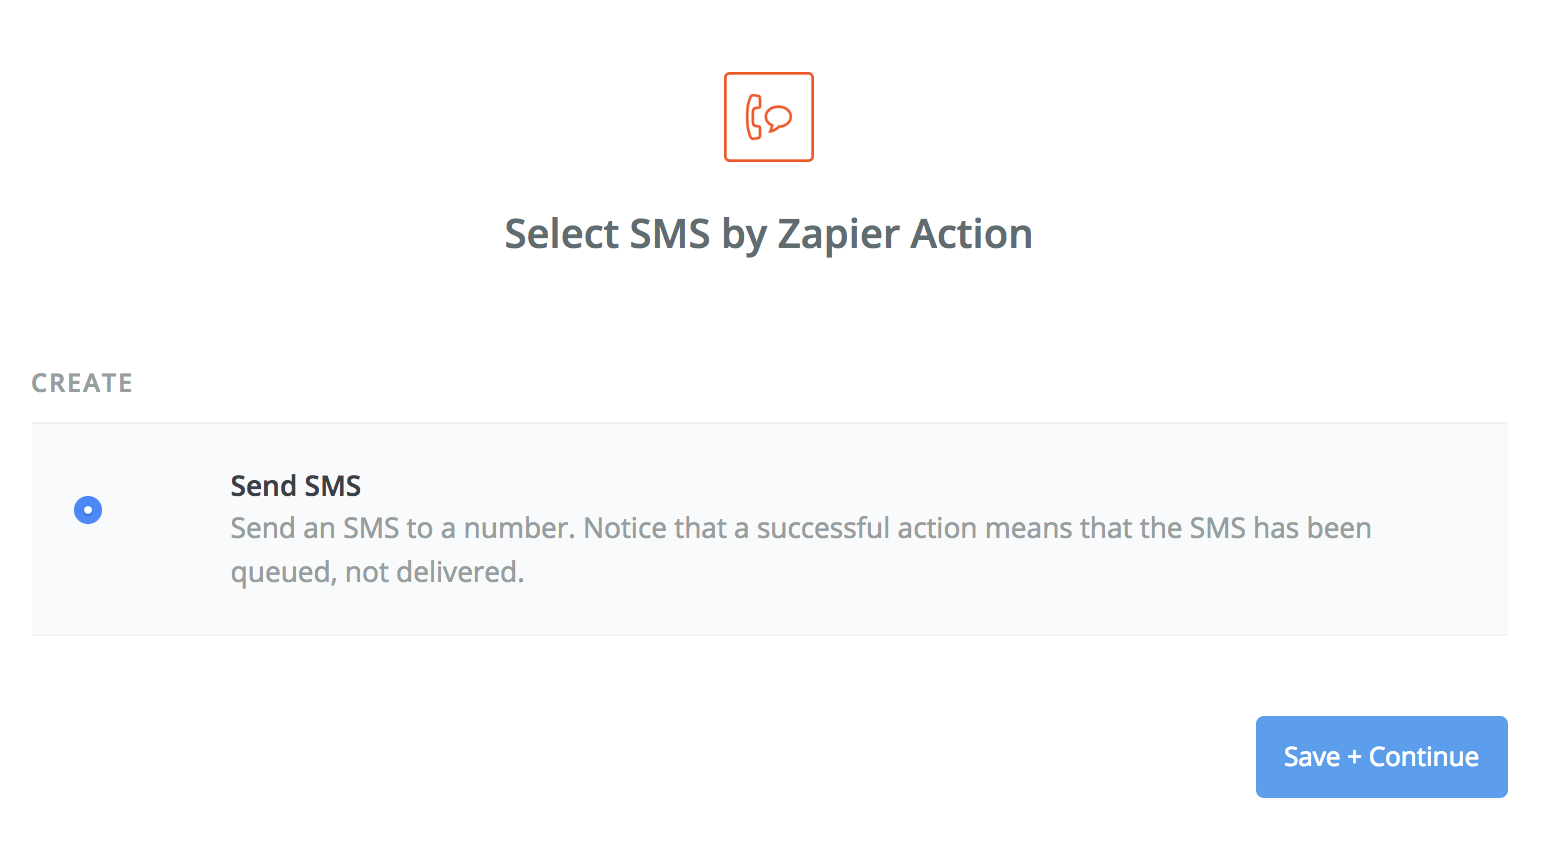 Using the Send SMS action in Zapier